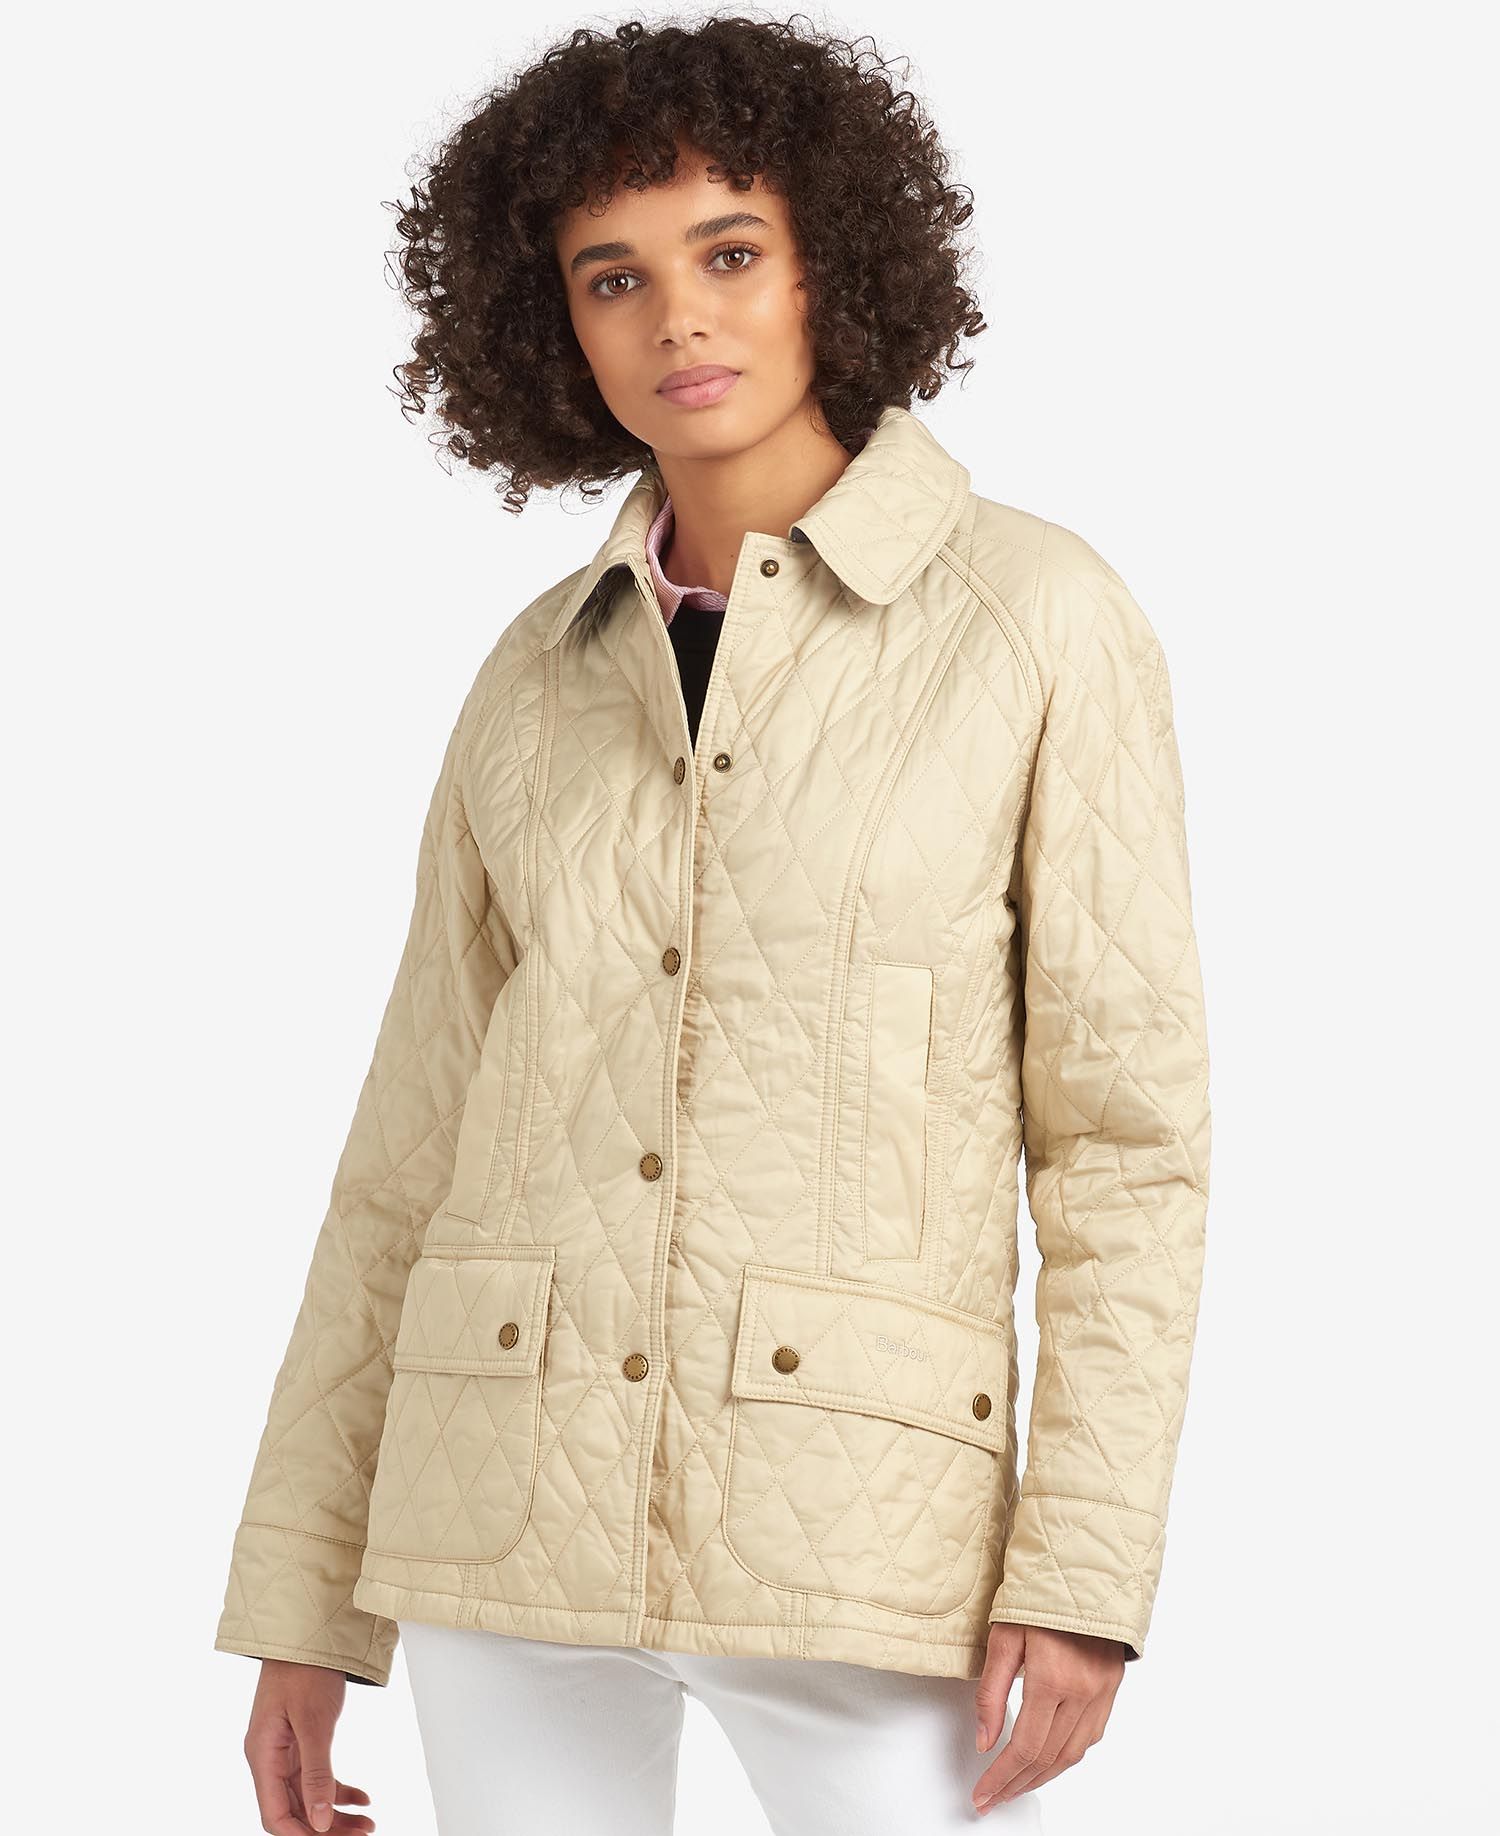 Barbour Summer Beadnell Quilt in Cream | Barbour